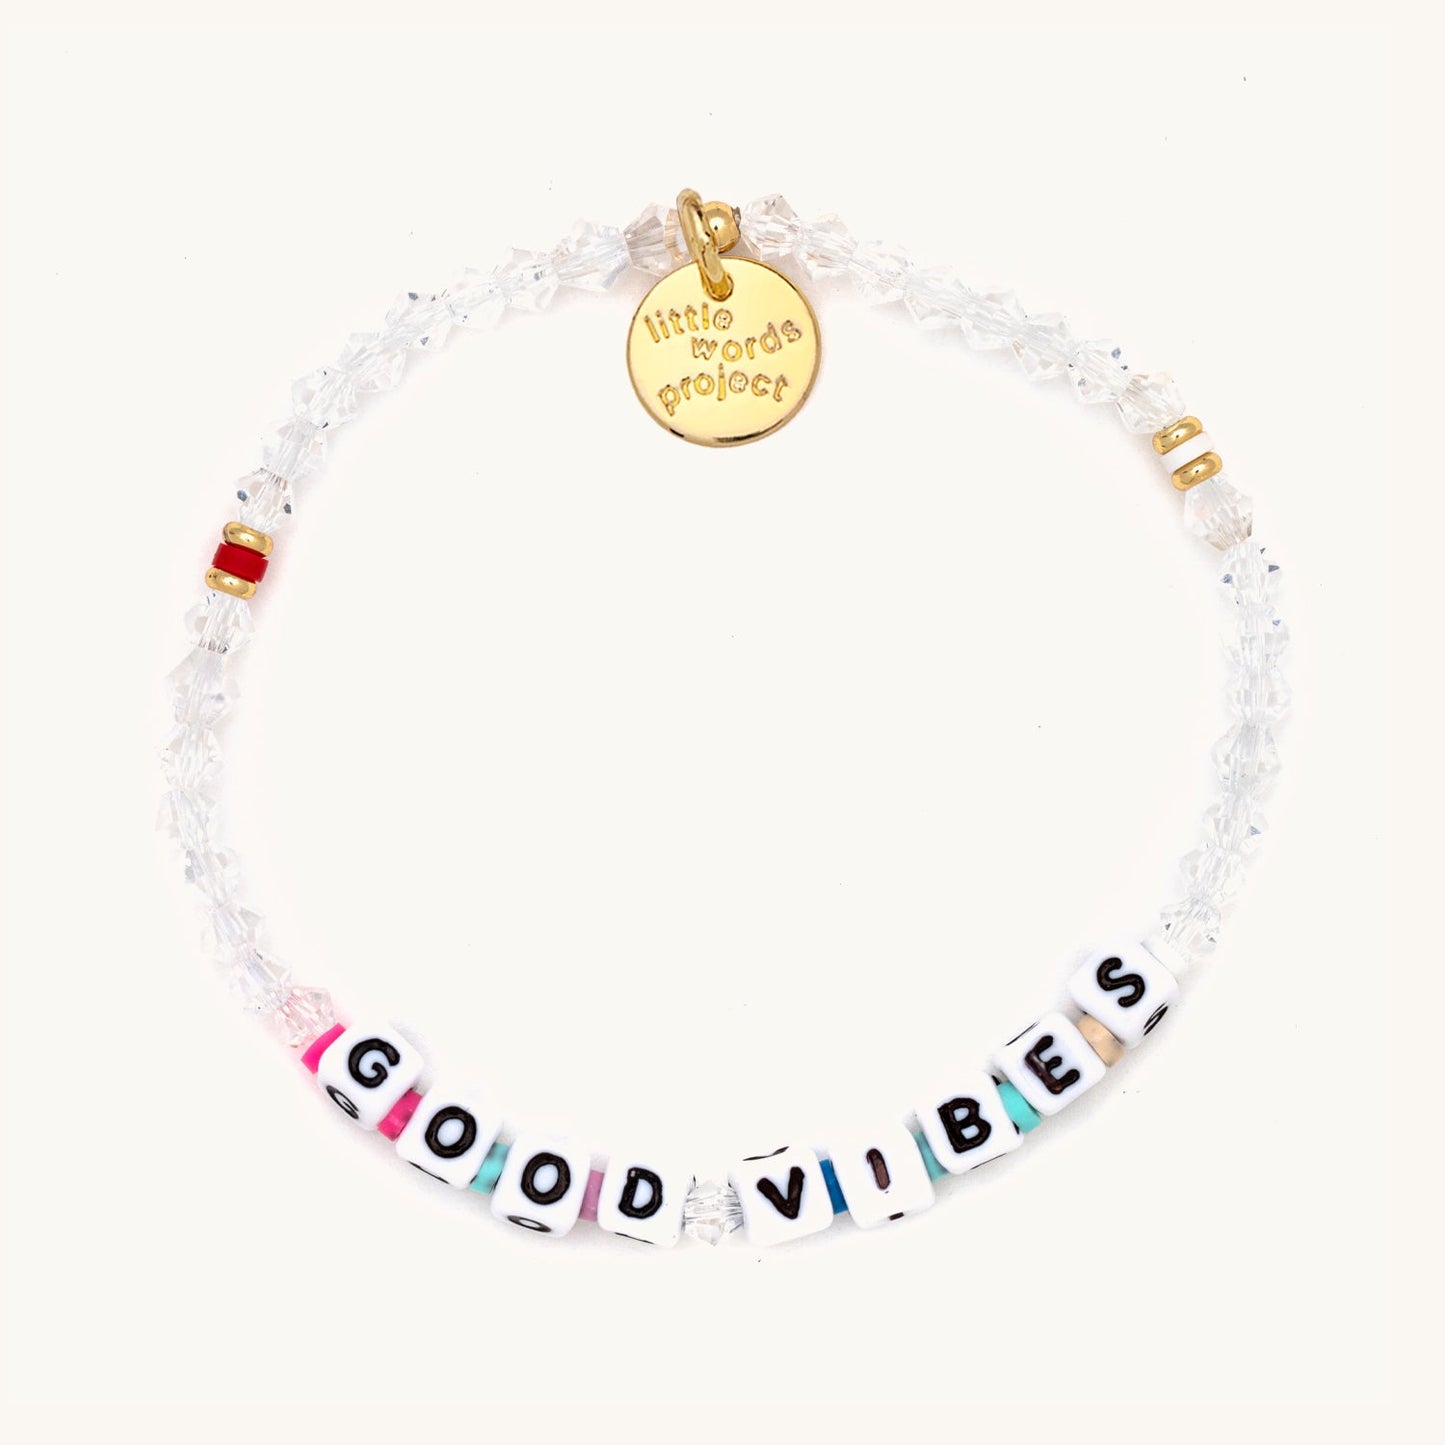 Little Words Project "Good Vibes" - Best Of